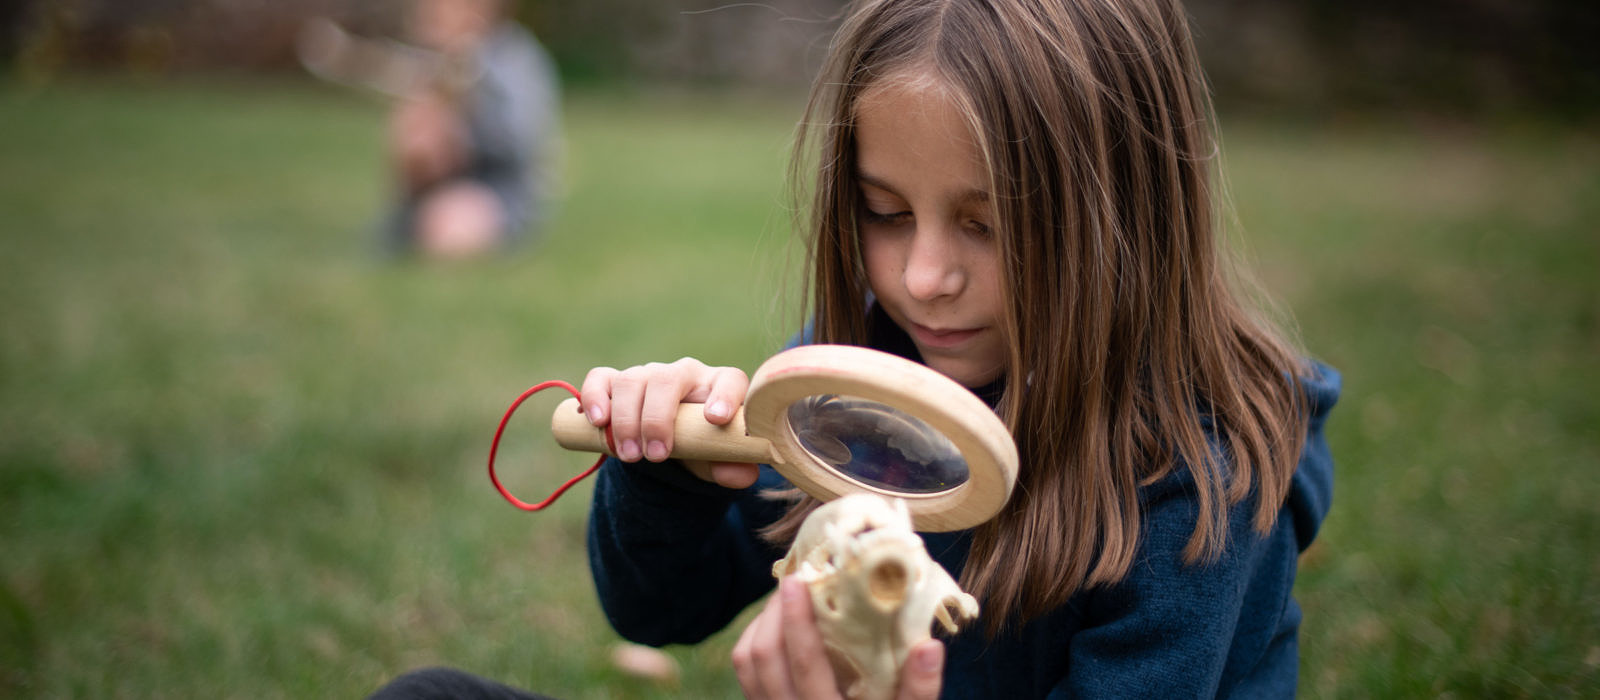 A girl uses a magnifying glass to look closely at an animal skull. (photo © Ben Conant)